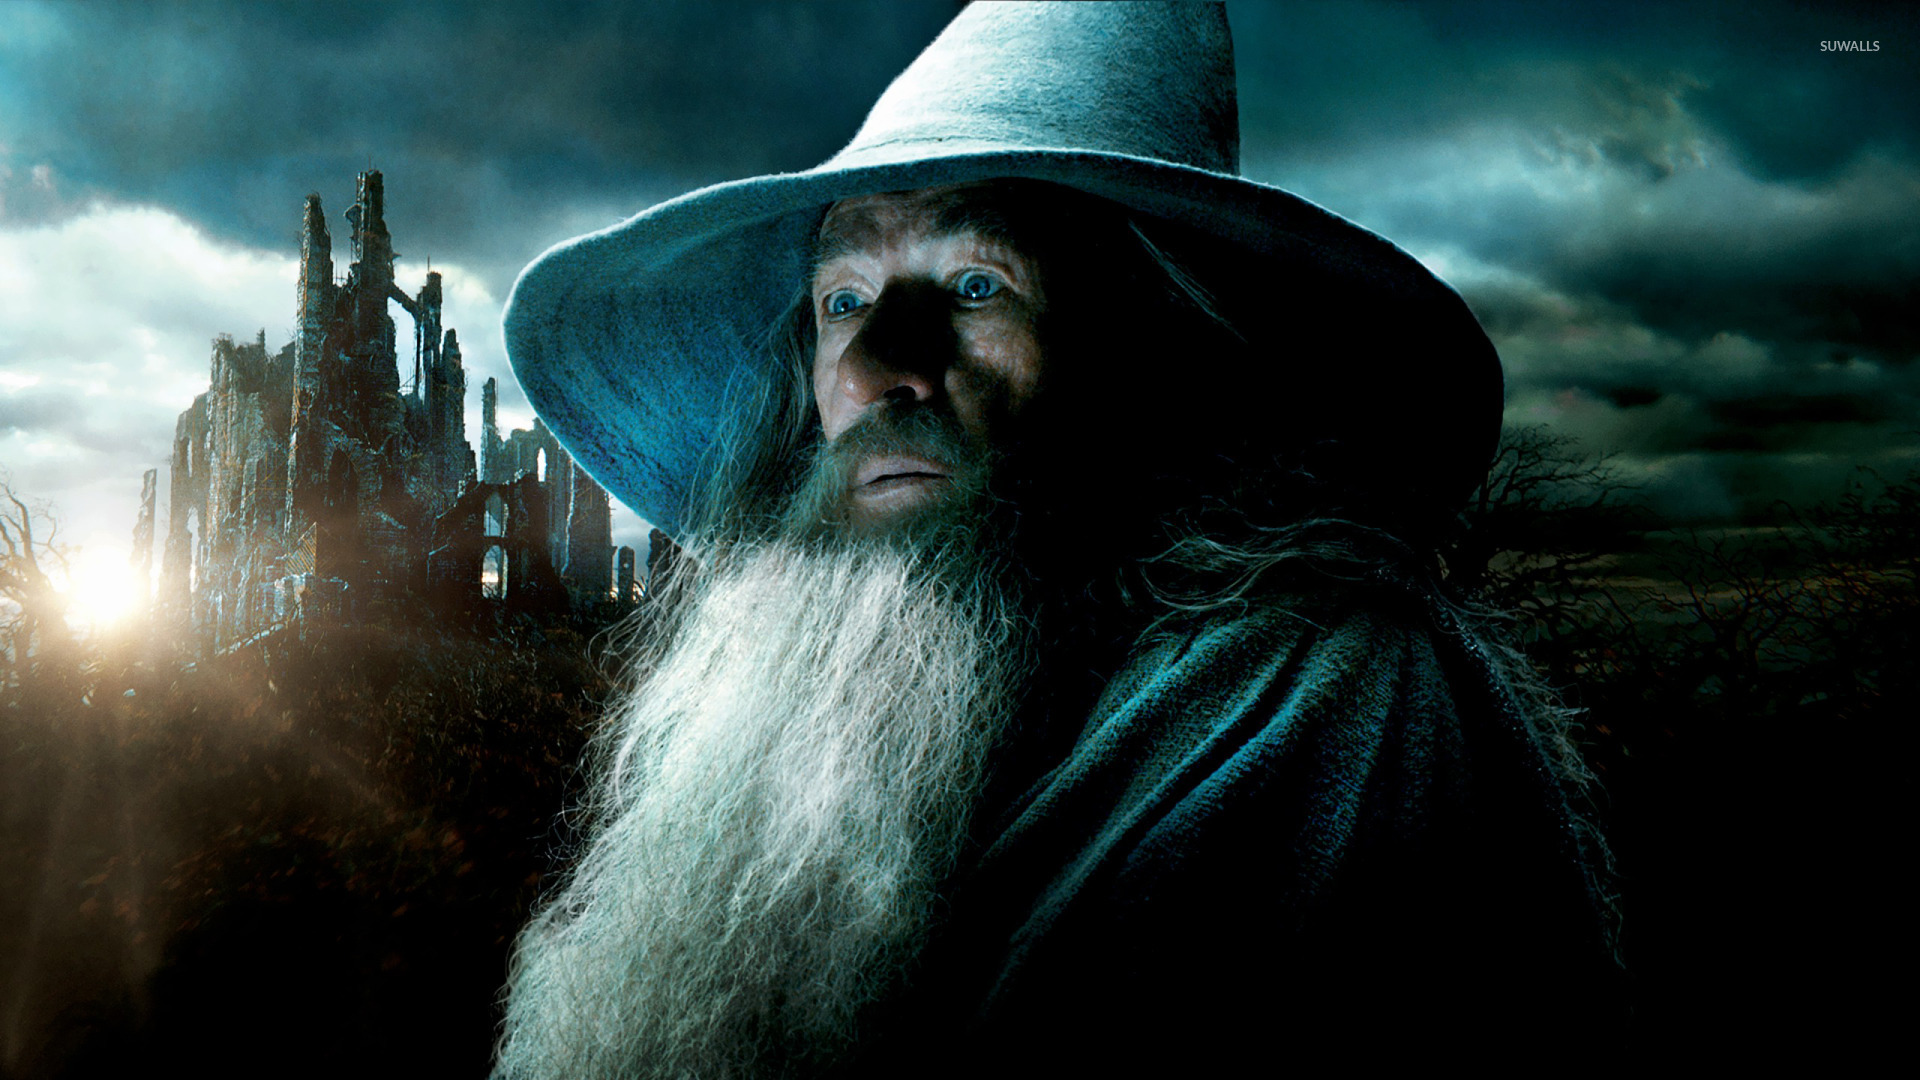 Gandalf - The Hobbit: The Desolation of Smaug [2] wallpaper - Movie  wallpapers - #26063